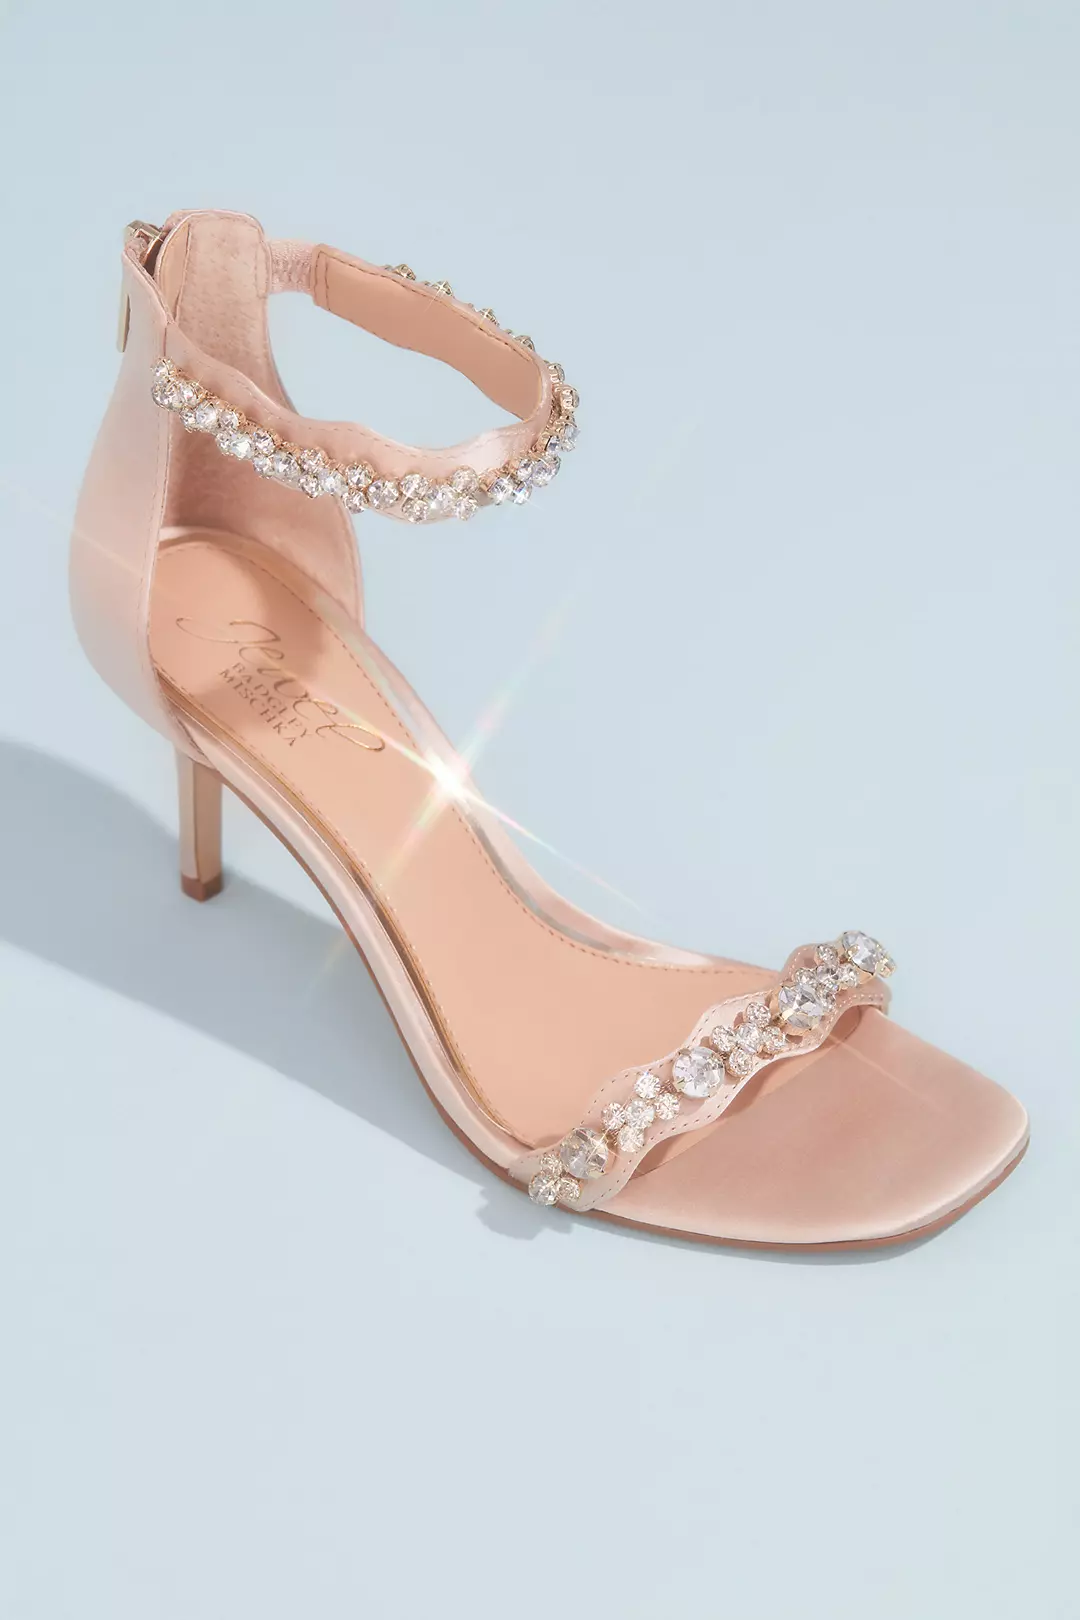 Satin Stiletto Sandals with Crystal Ankle Straps Image